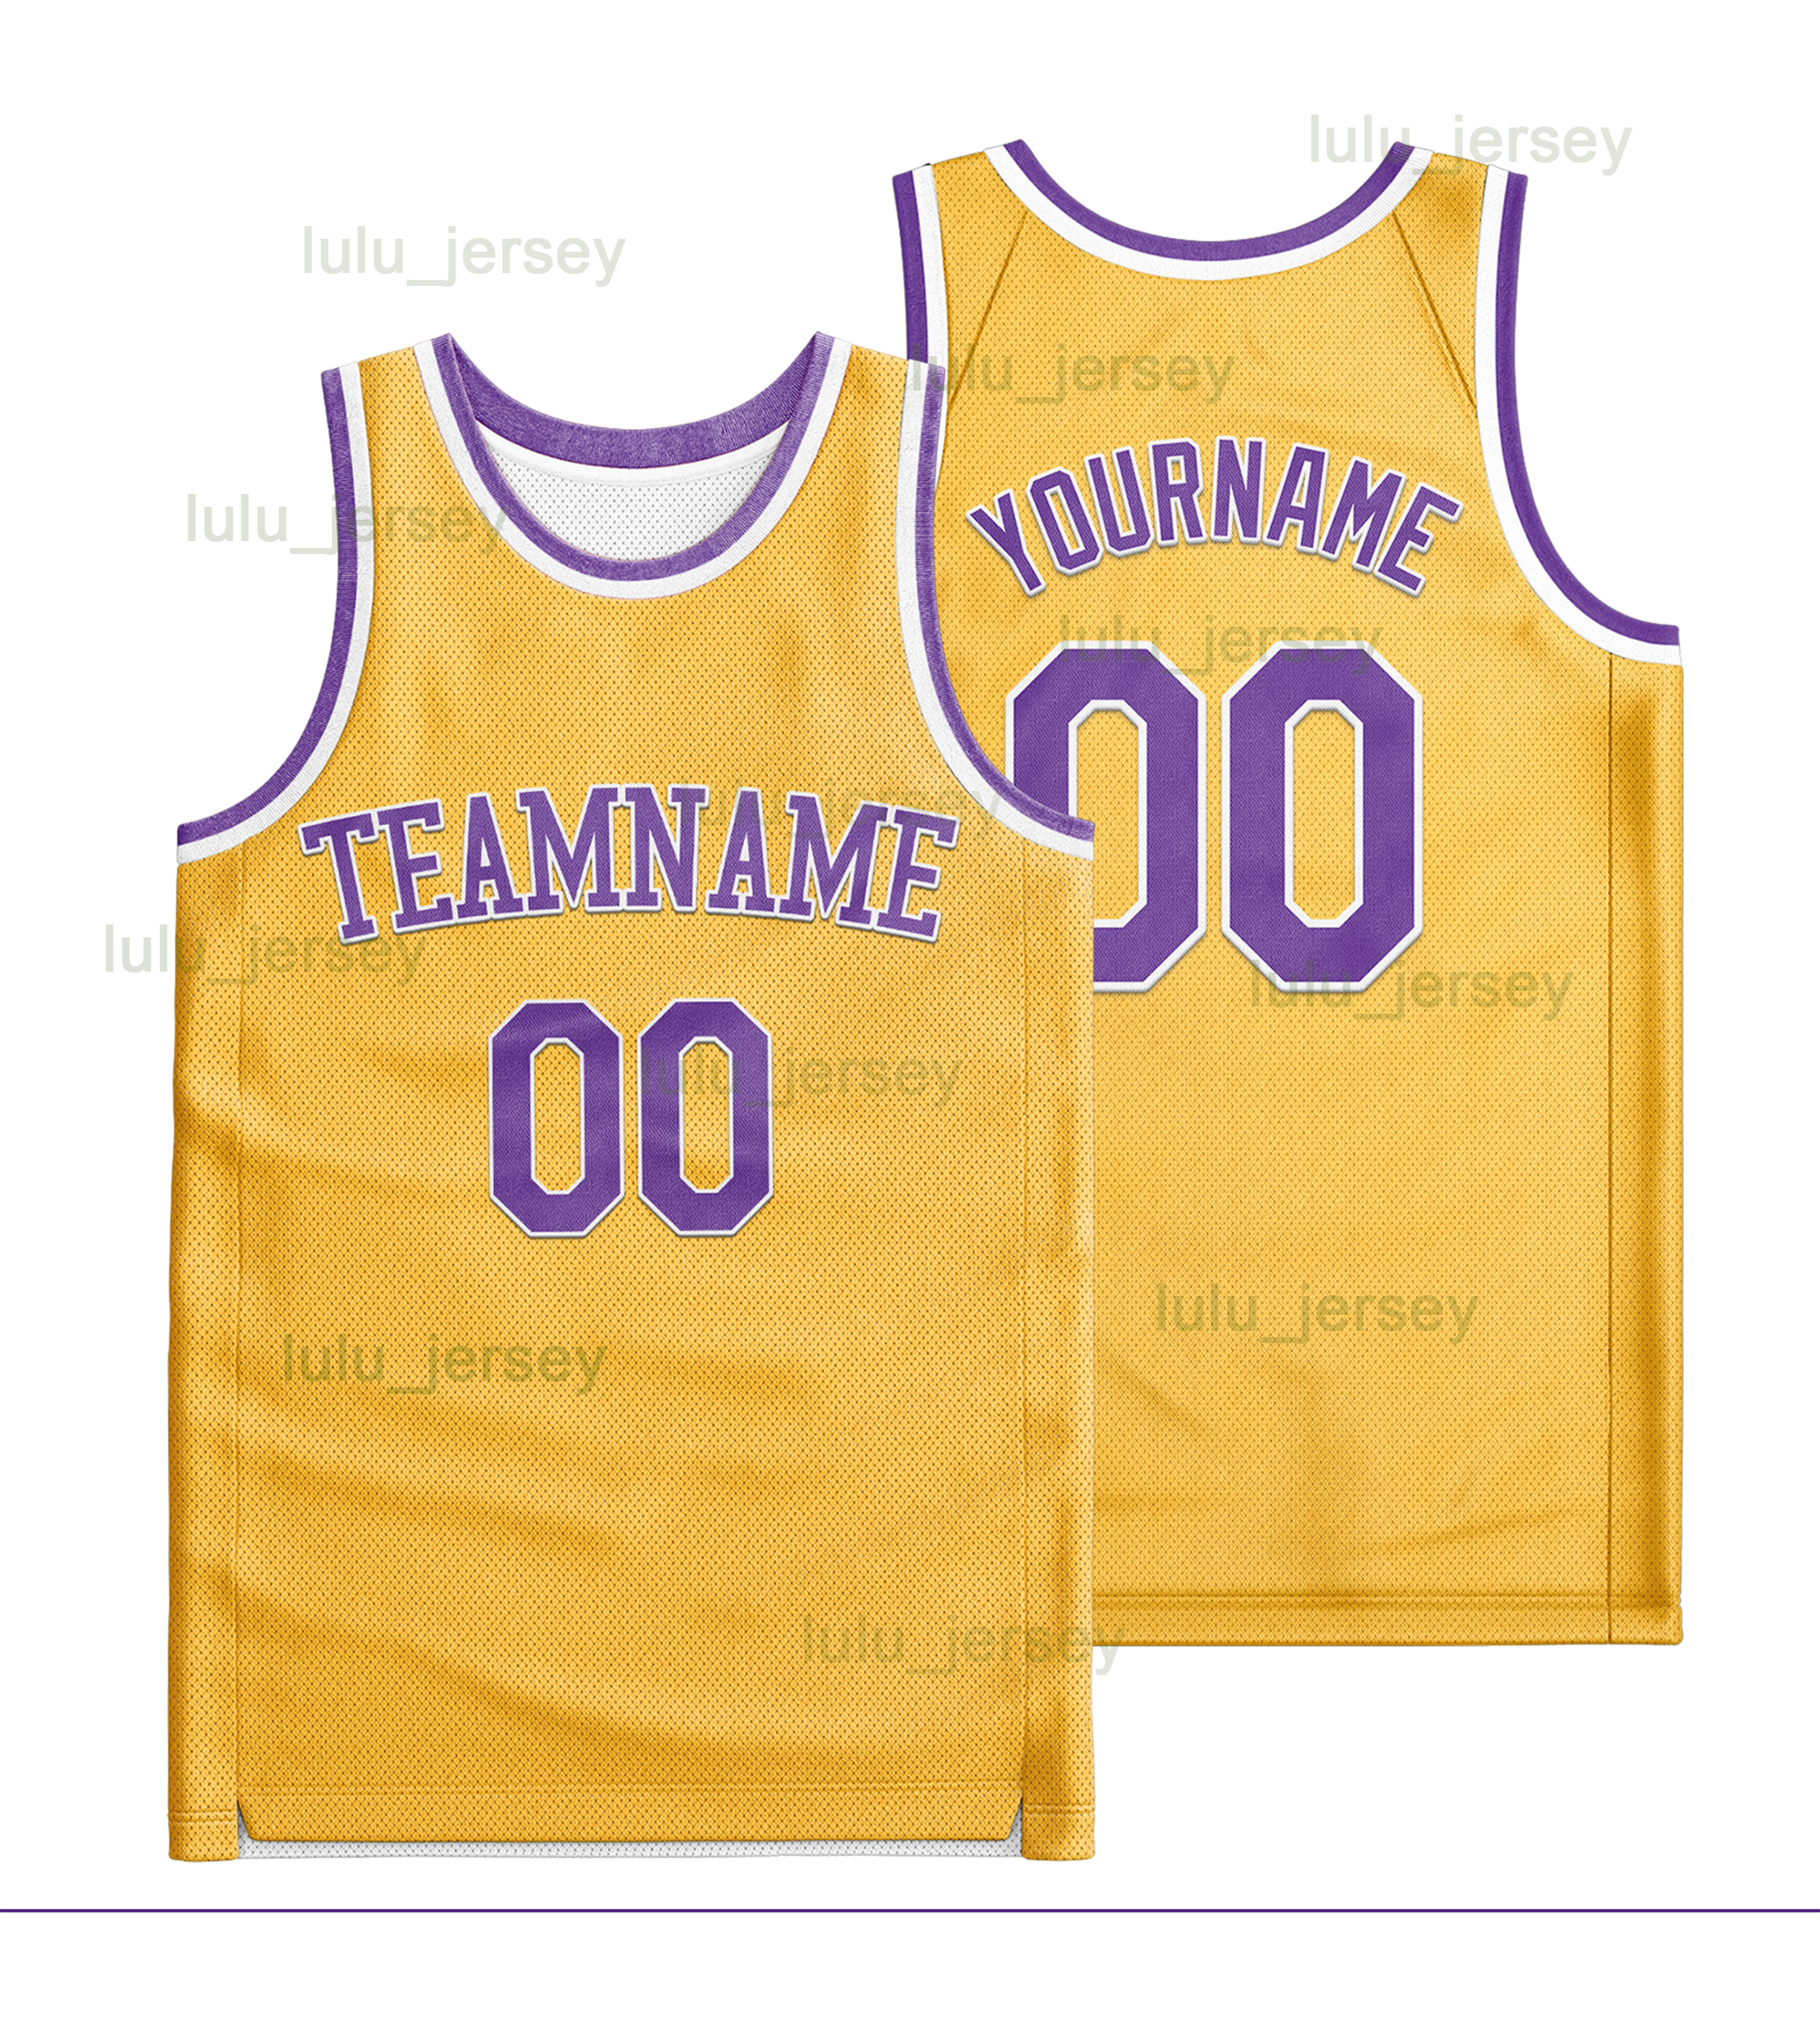 

Custom Lakers jersey Cool Colorful Design Basketball Jerseys Fashion Shirts Uniform Youth Jerseys For Men Women Fans Plus Size jersey, Color 1